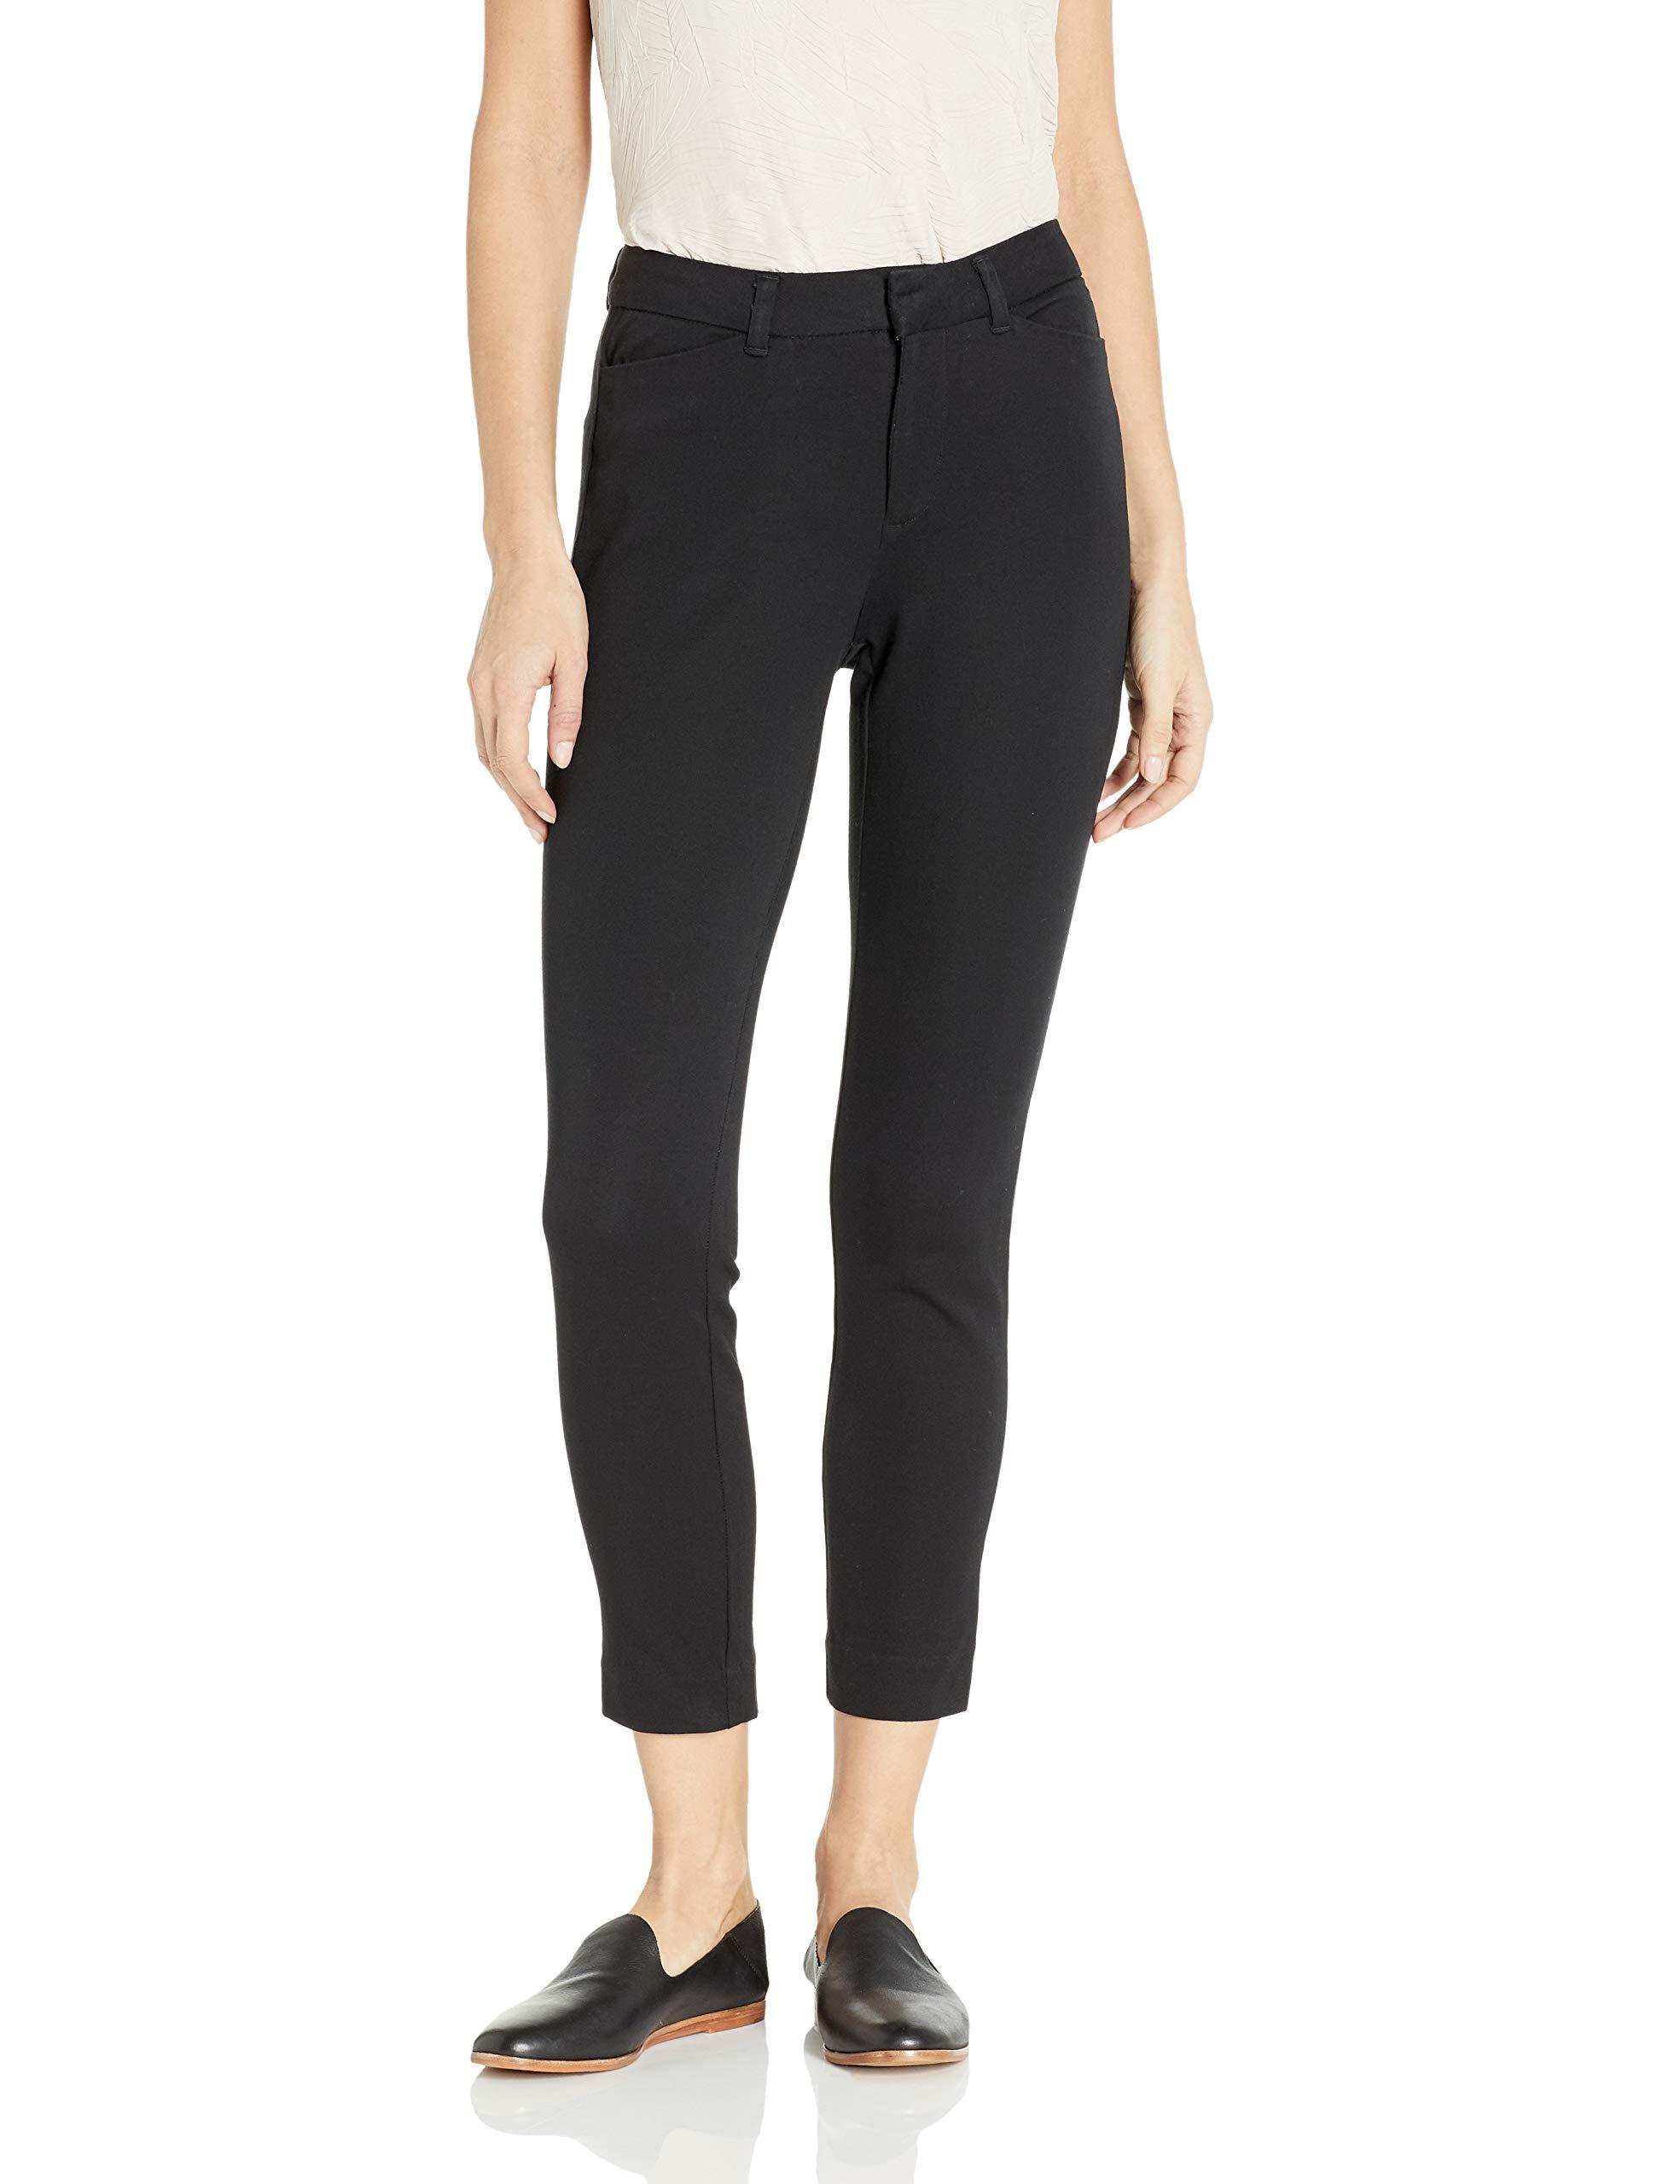 Amazon Essentials Skinny Ankle Pant in Black - Lyst